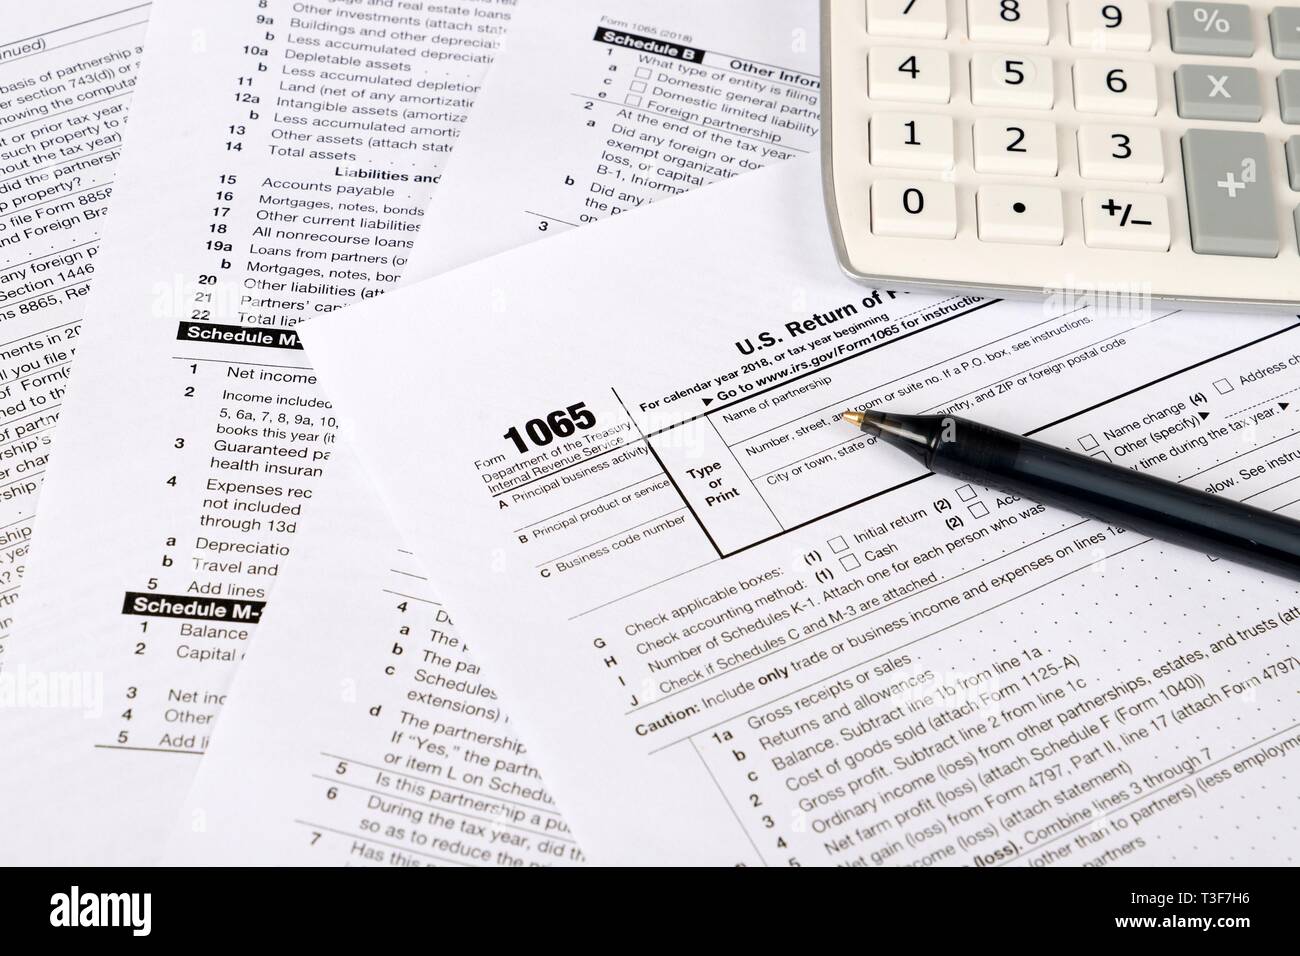 1065 tax form lies near hundred dollar bil and calculator  on a Table. US Return for parentship income Stock Photo